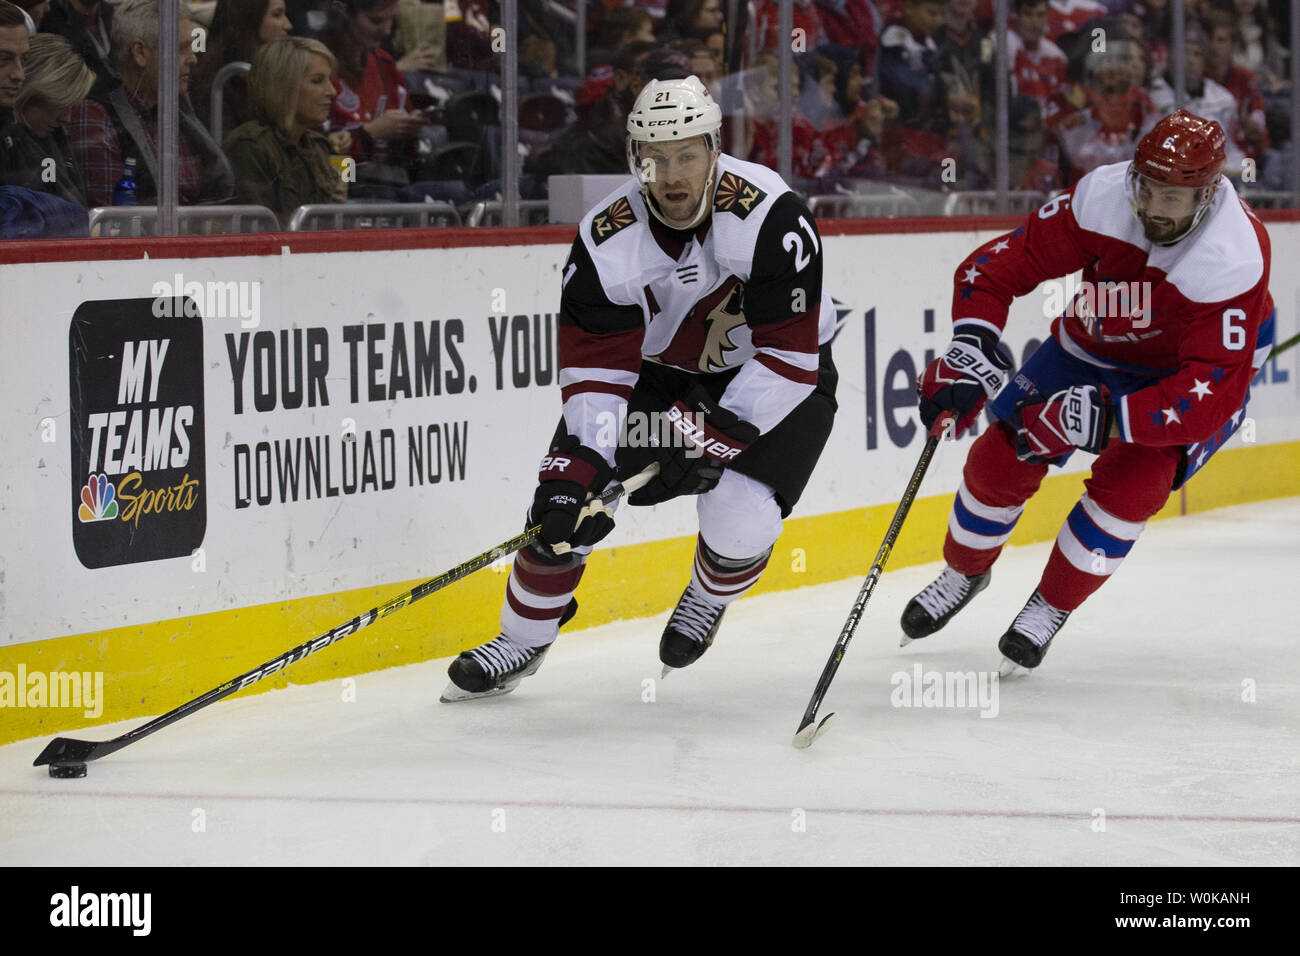 Arizona Coyotes center Derek Stepan (21) carries the puck while defended by Washington Capitals defenseman Michal Kempny (6) during the second period at Capital One Arena on November 11, 2018. The Washington Capitals host the Arizona Coyotes to end a multi-game home stand. Photo by Alex Edelman/UPI Stock Photo